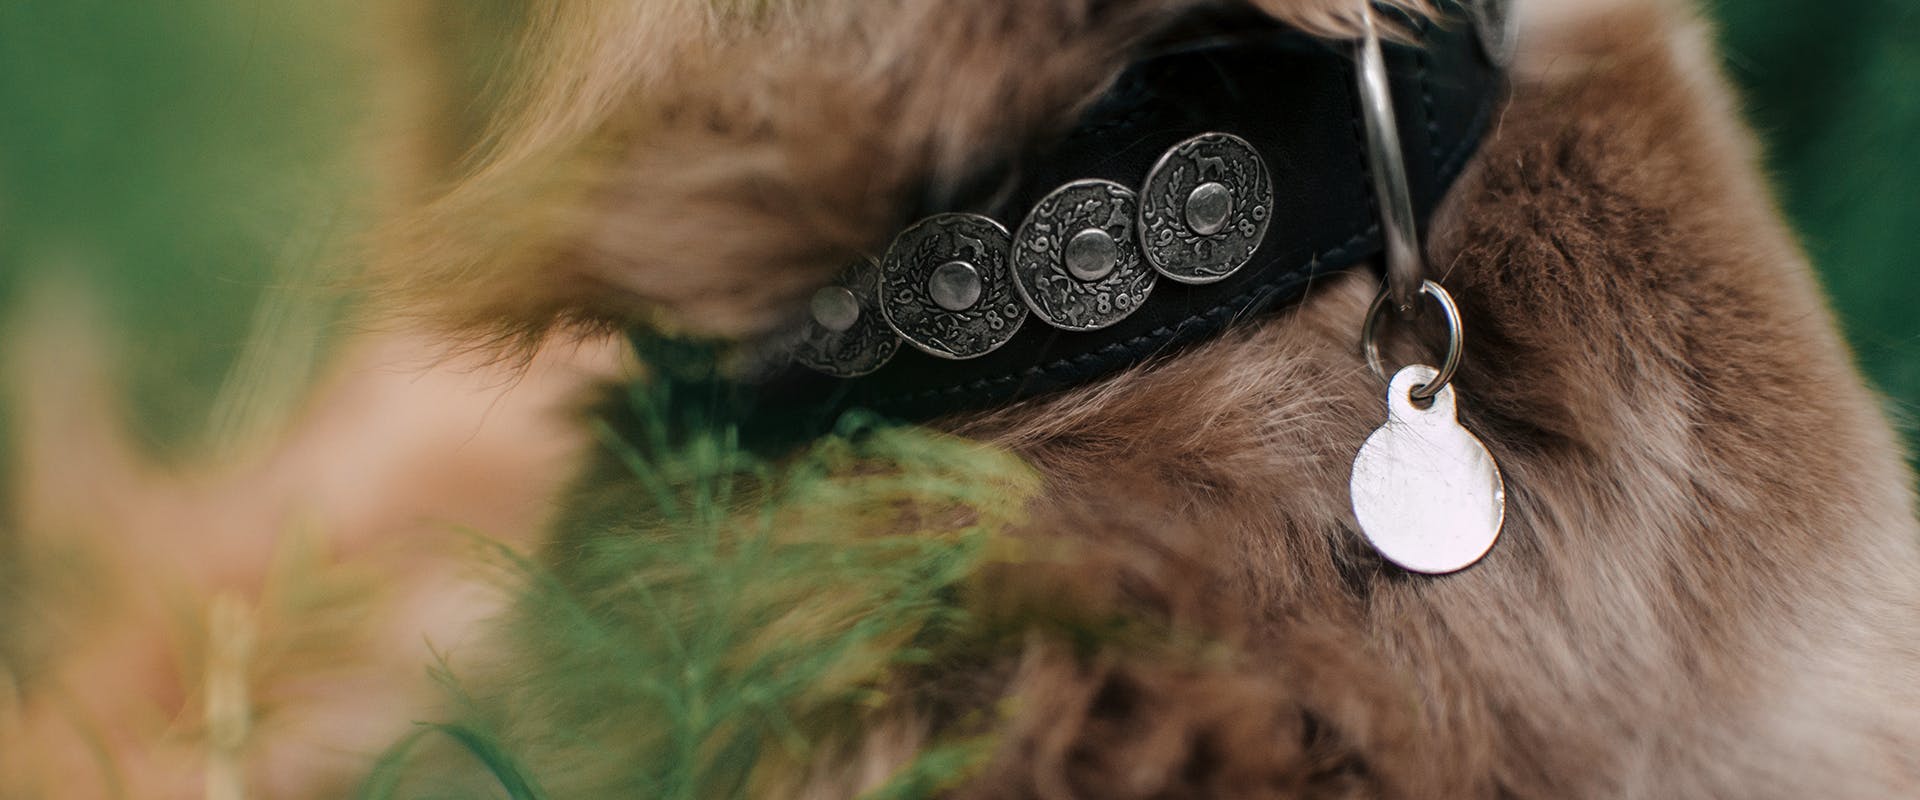 A close up of a dog wearing an ID tag